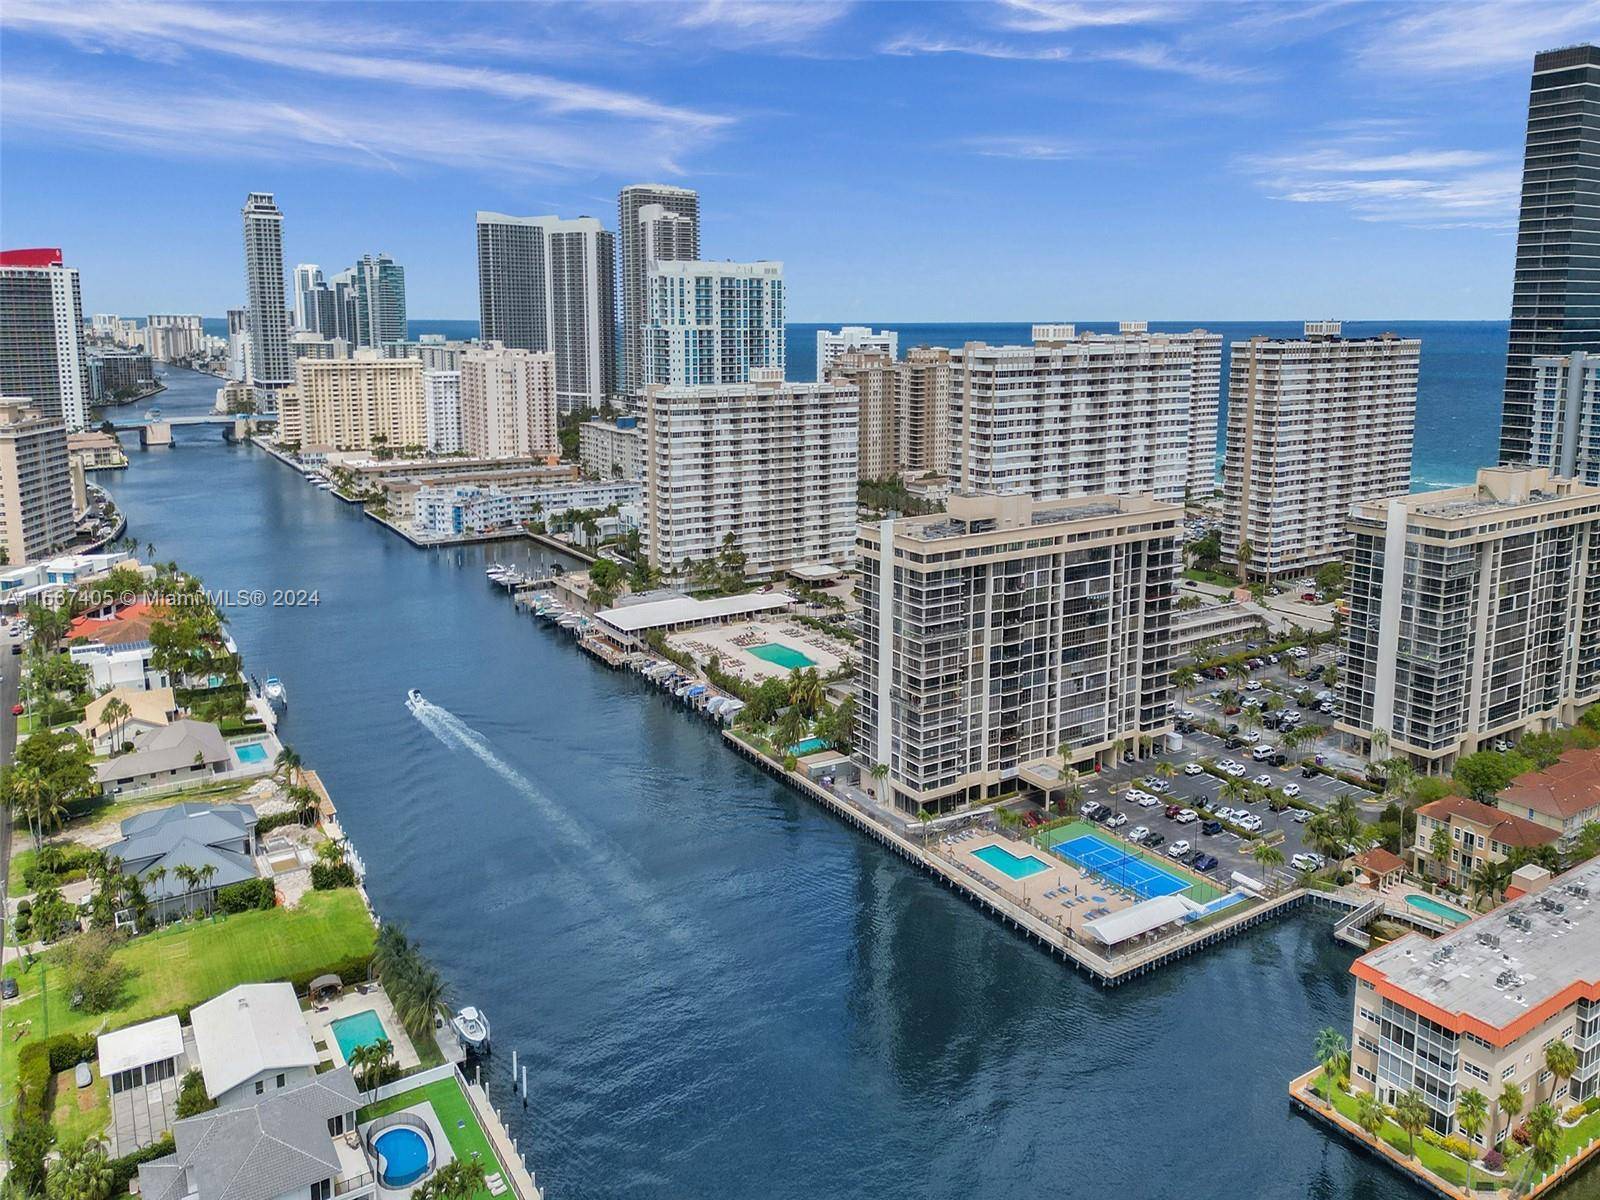 Impeccably remodeled one of a kind, ultra modern 2 bed 2 bath condo w breathtaking ocean intracoastal views directly across the street from the beach.